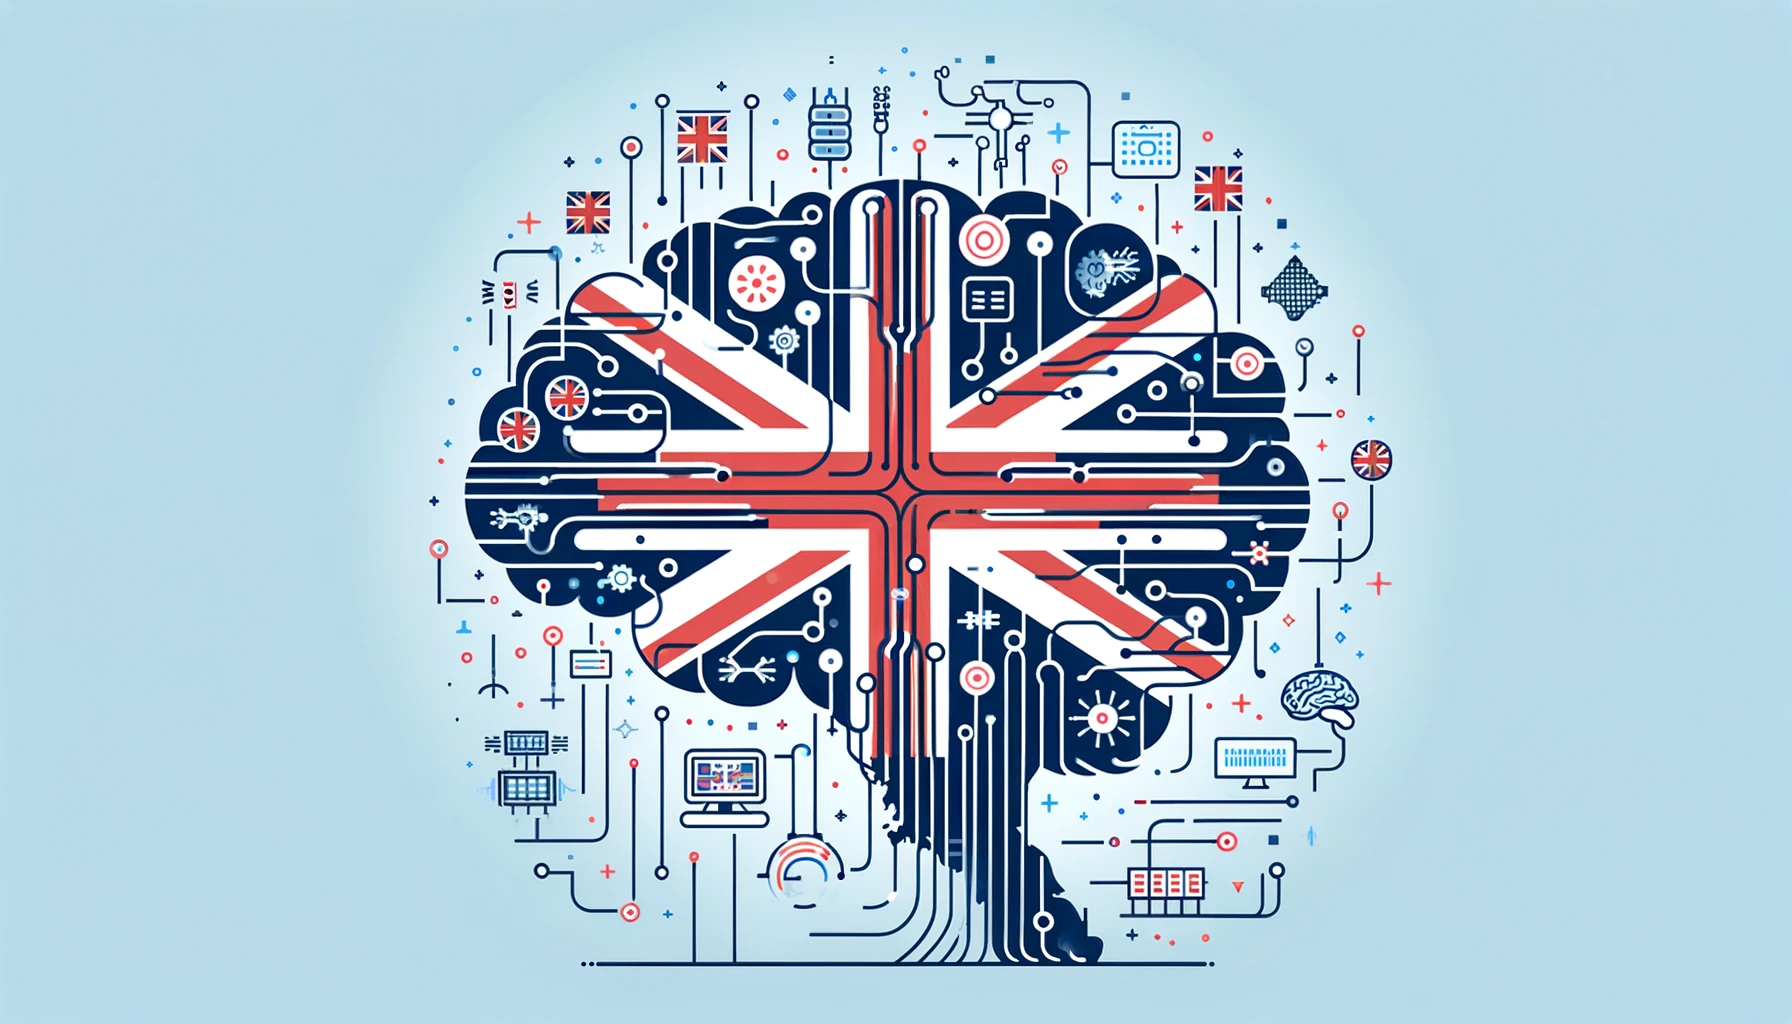 Britain allocates £100 million towards AI research and regulatory efforts.